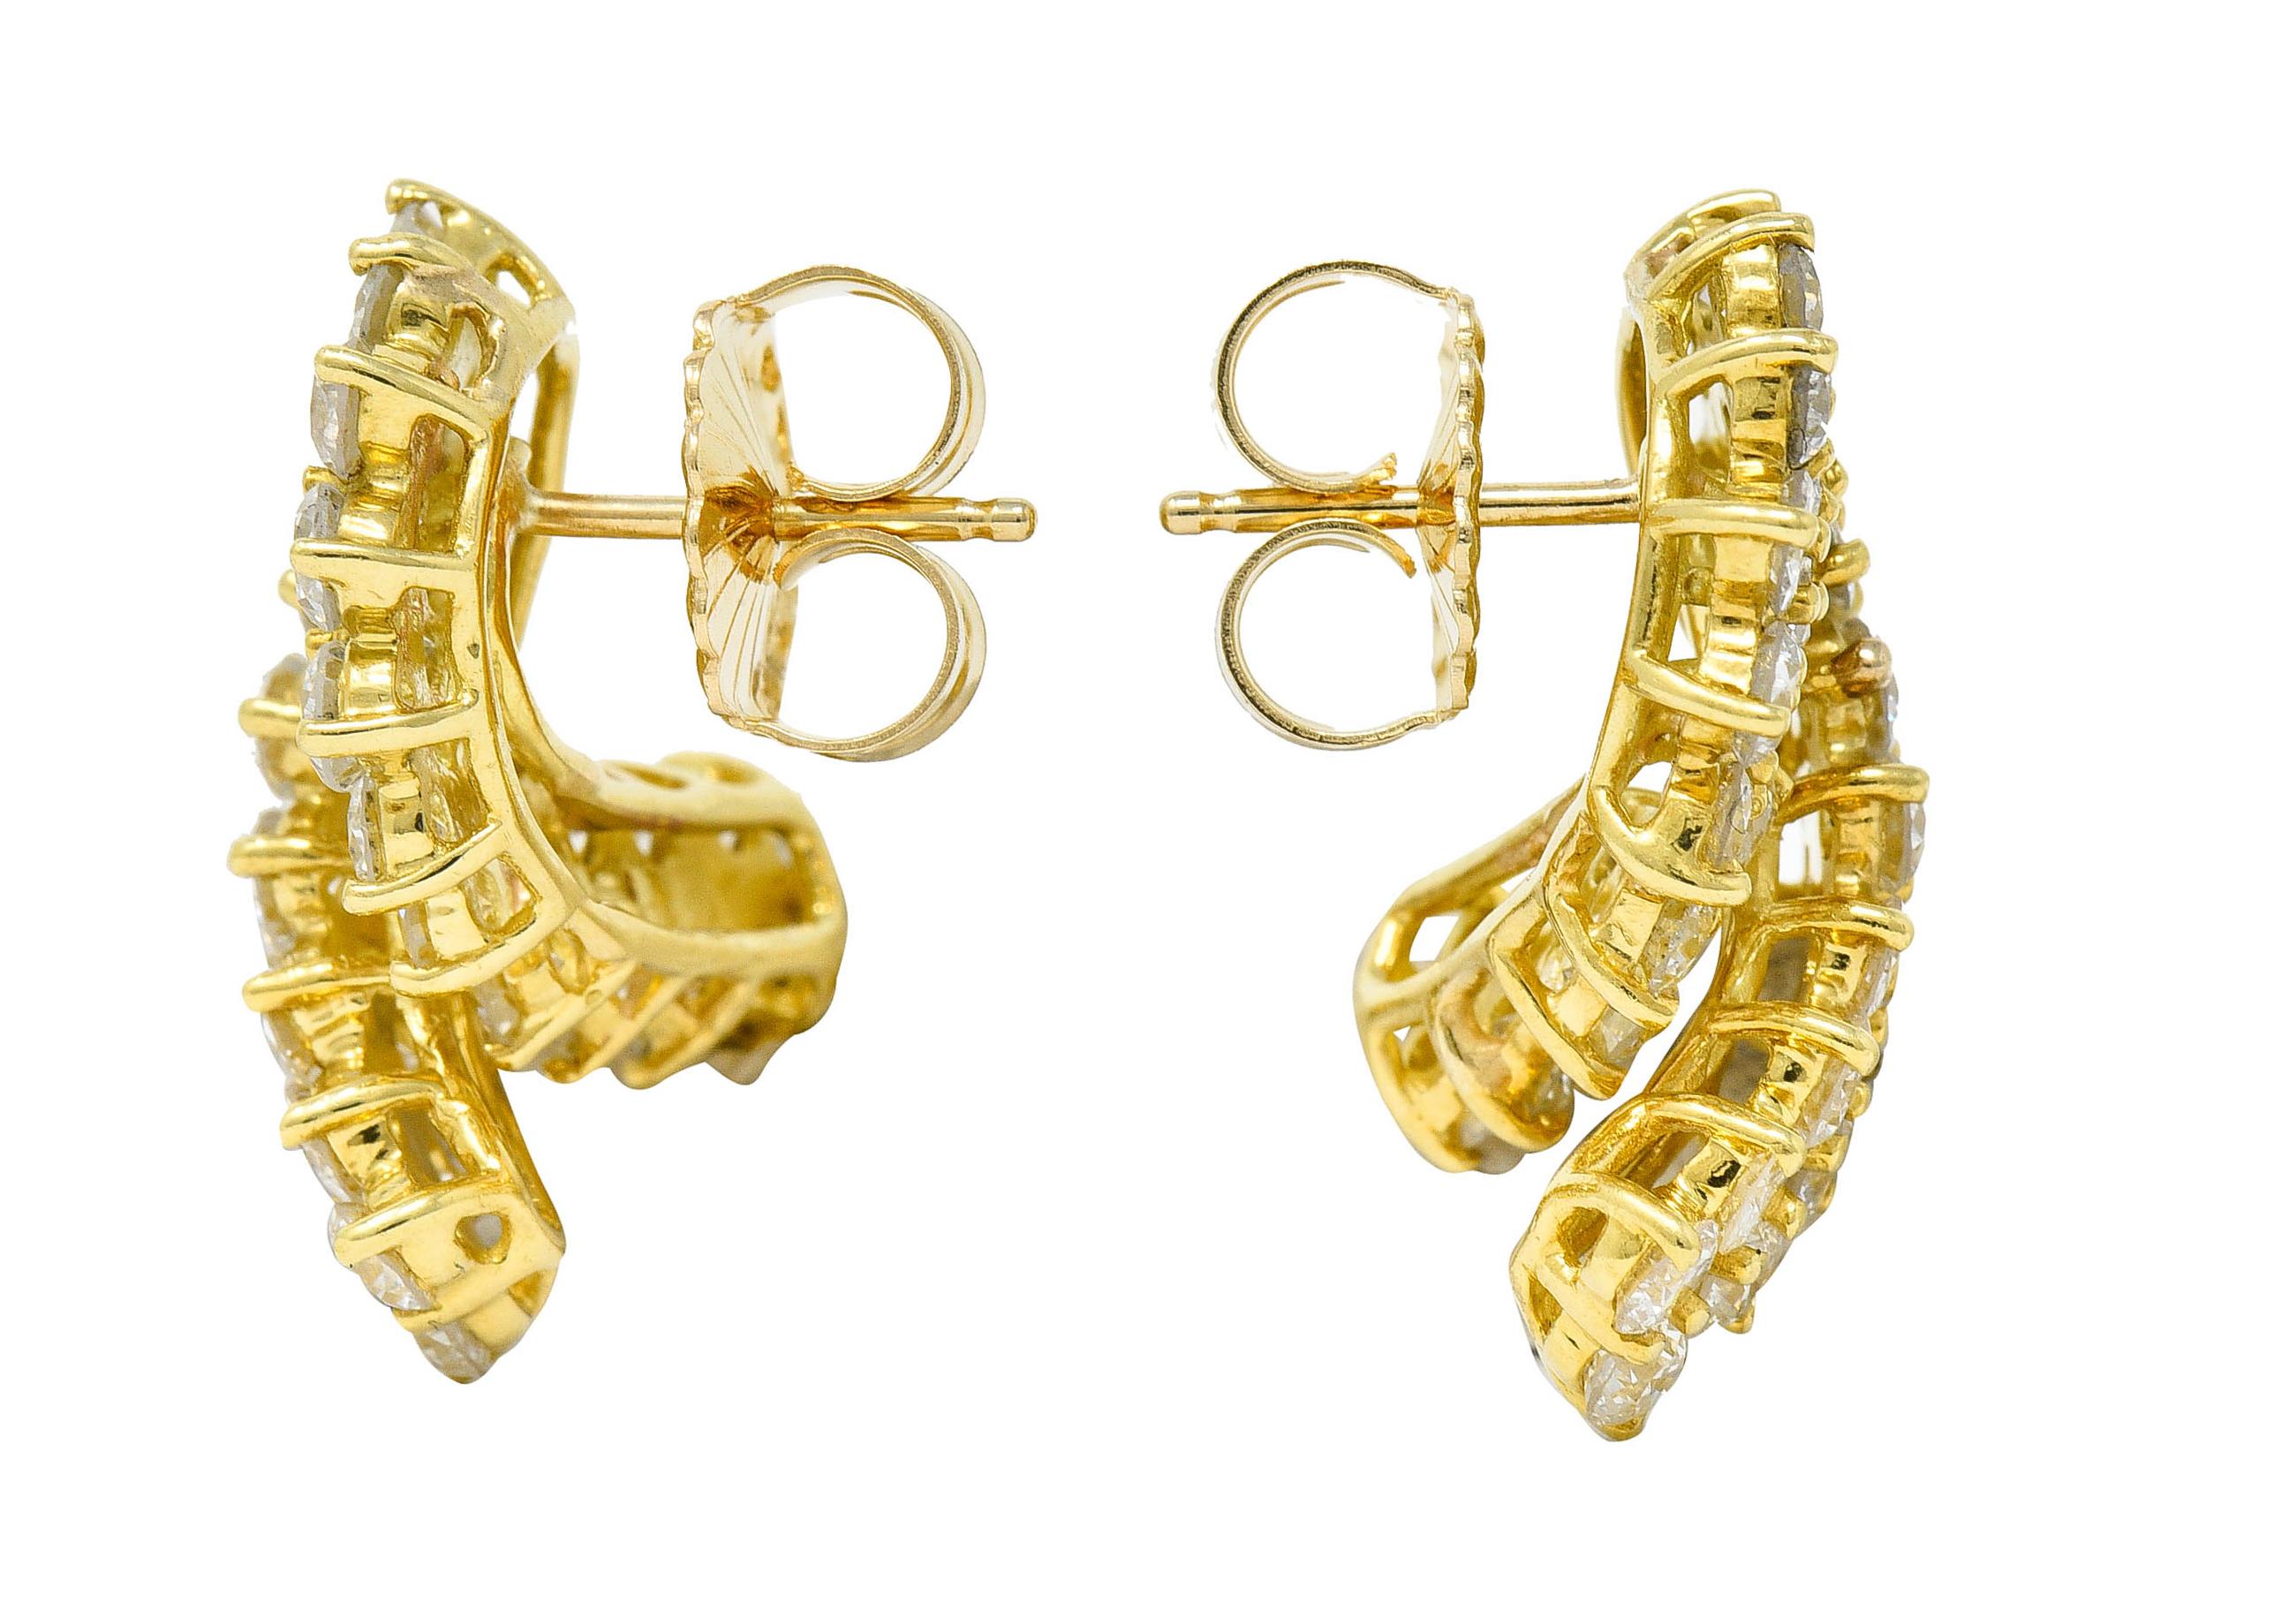 Earrings are designed as a looped ribbon

Basket set throughout by round brilliant cut diamonds

Weighing in total approximately 6.80 carats - G/H color with SI clarity

Tested as 18 karat gold

Circa: 1990s

Measures: 3/4 x 1 inch

Total weight: